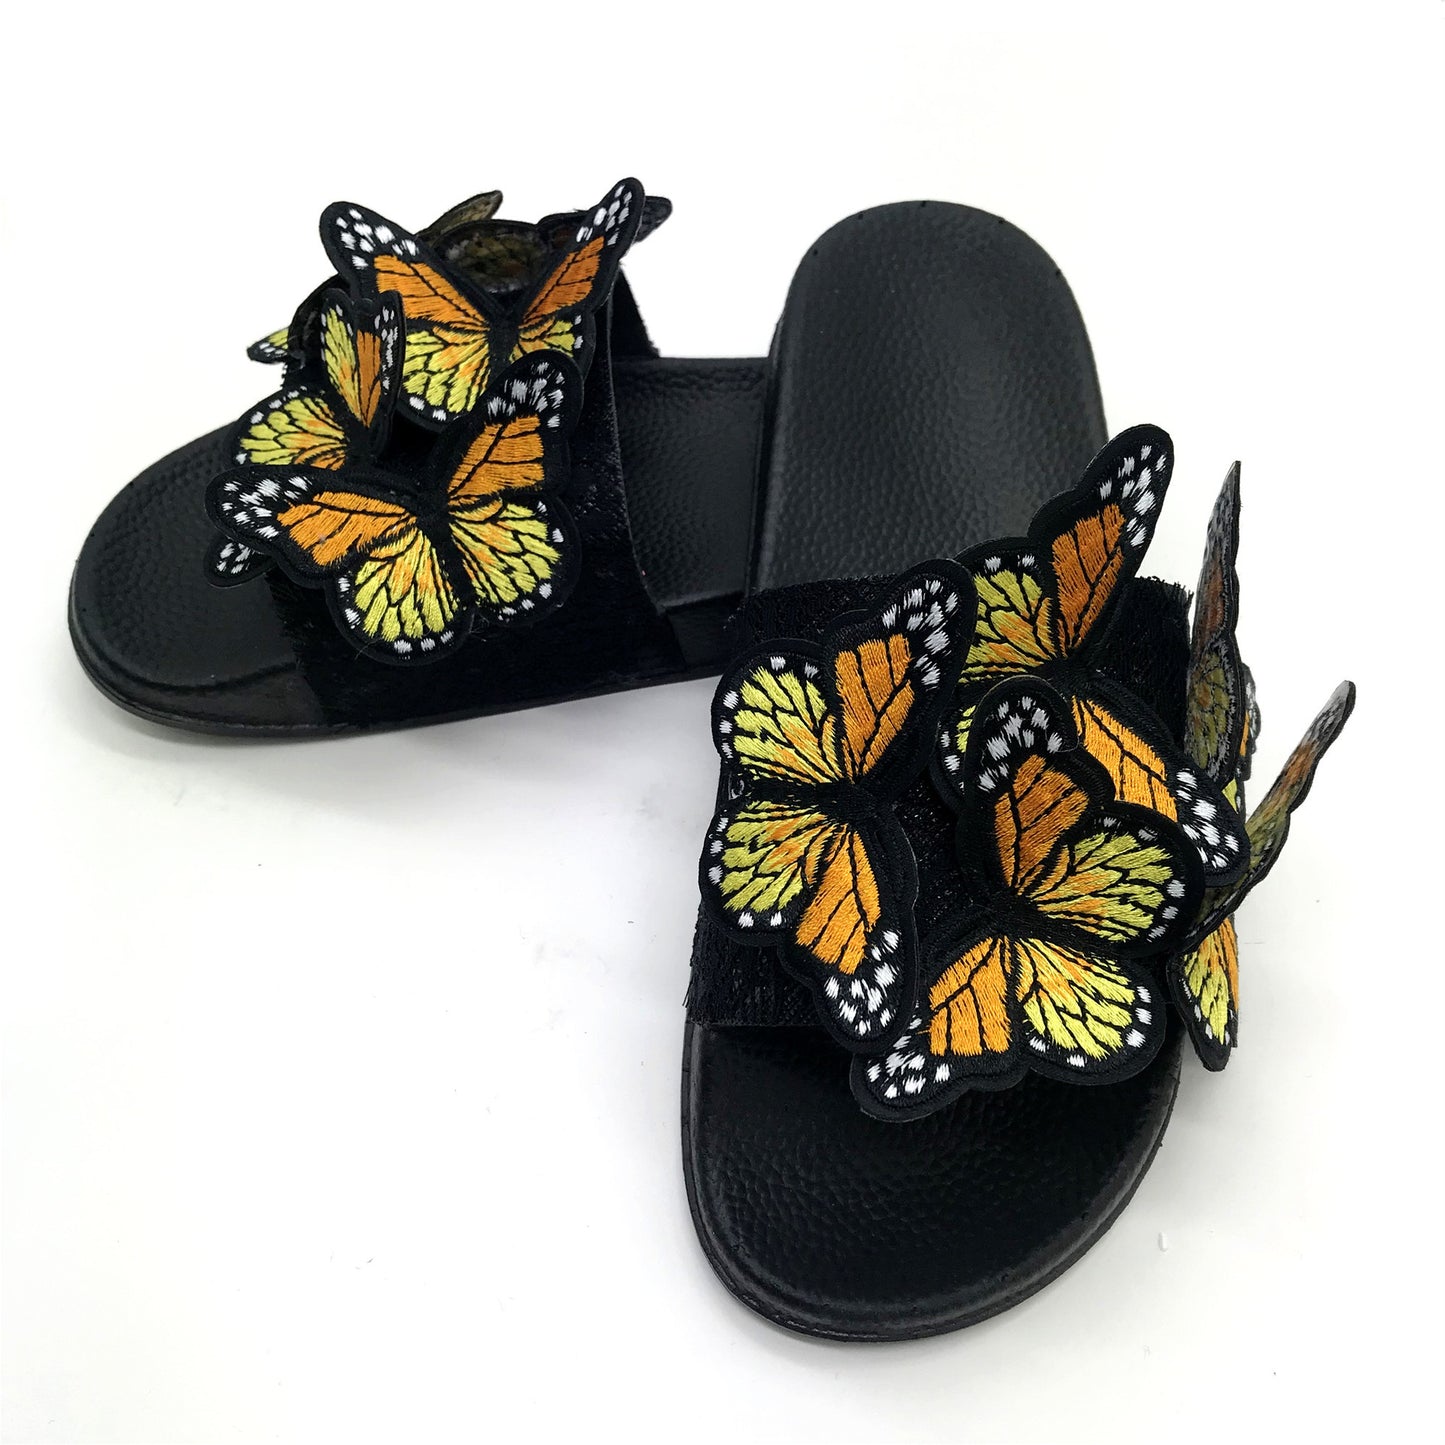 BamBam Women bowknot embroidered flip flops and flat shoes - BamBam